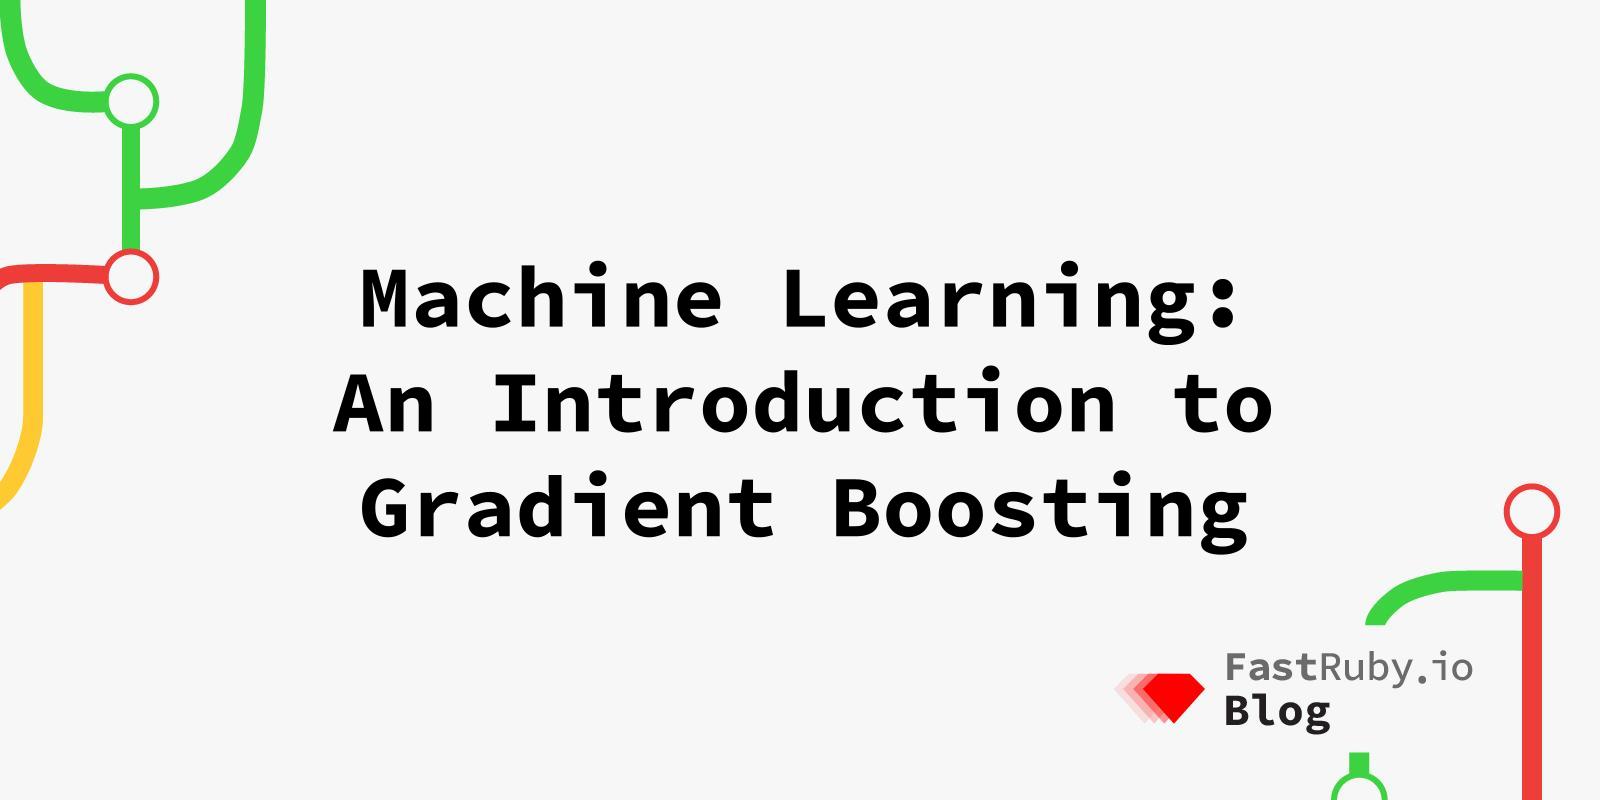 Machine Learning: An Introduction to Gradient Boosting